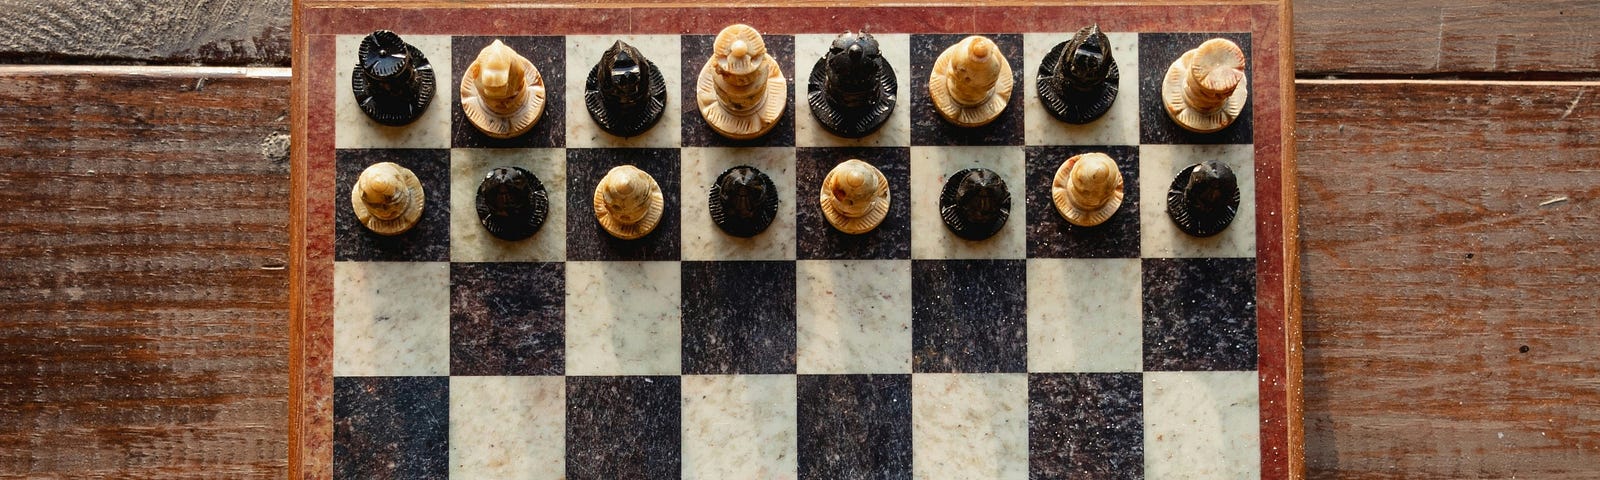 a chess board with all the pieces in play, in their starting positions, but each piece is alternating white and black on each side instead of the standard chess starting positions